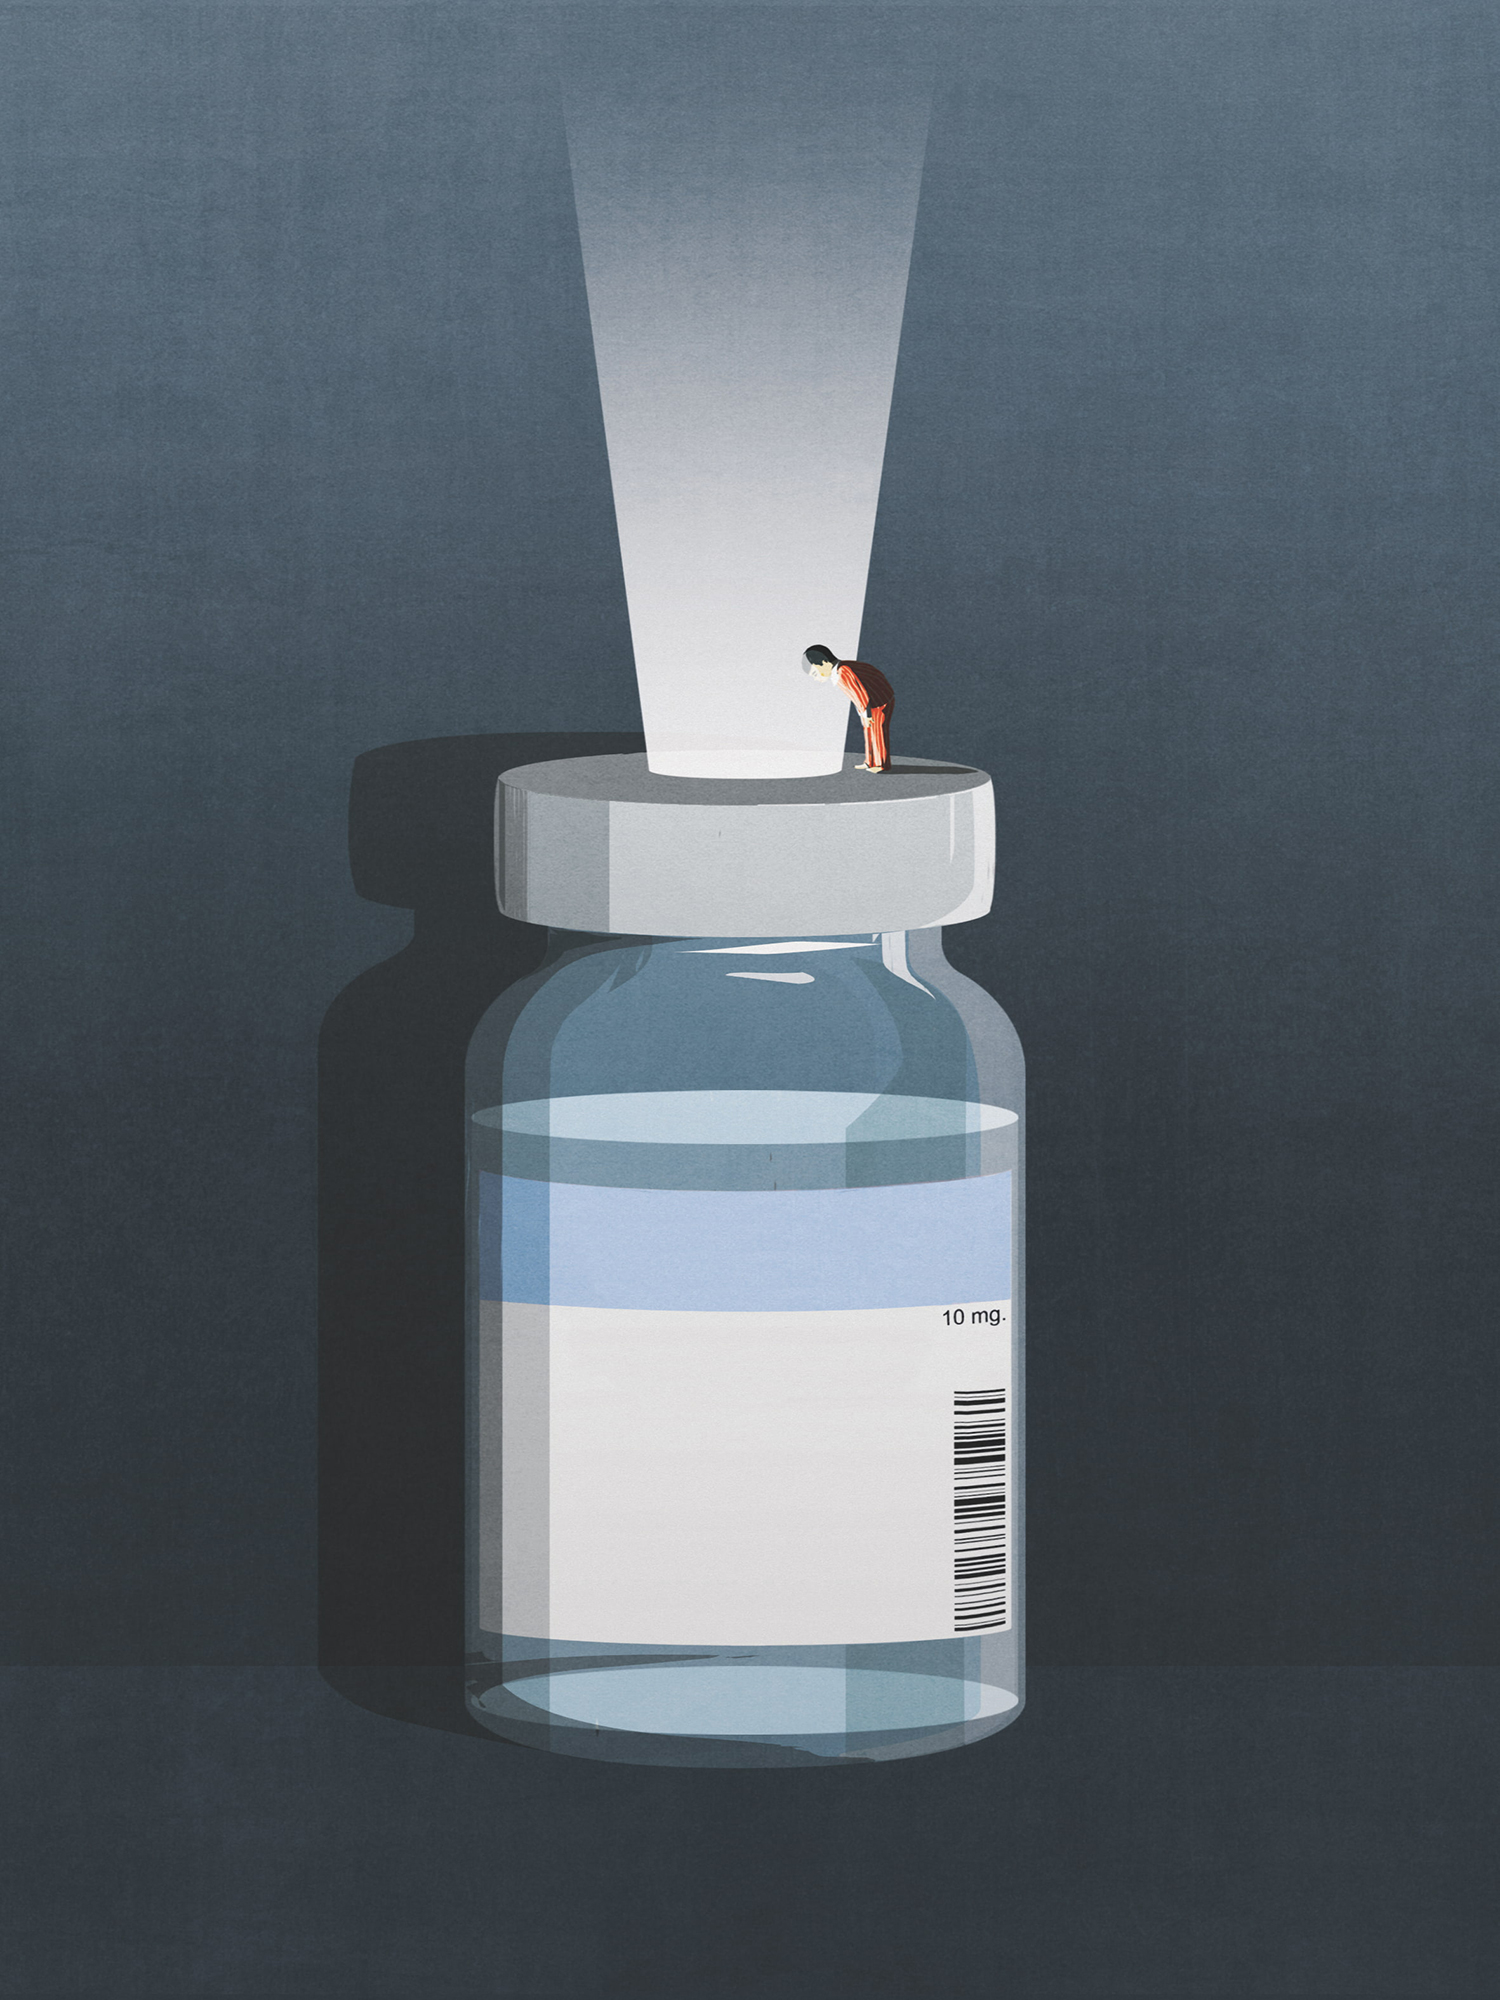 Illustration of a giant vial of insulin and a tiny figure standing on the cap looking down a hole in the centre, through which shines a light